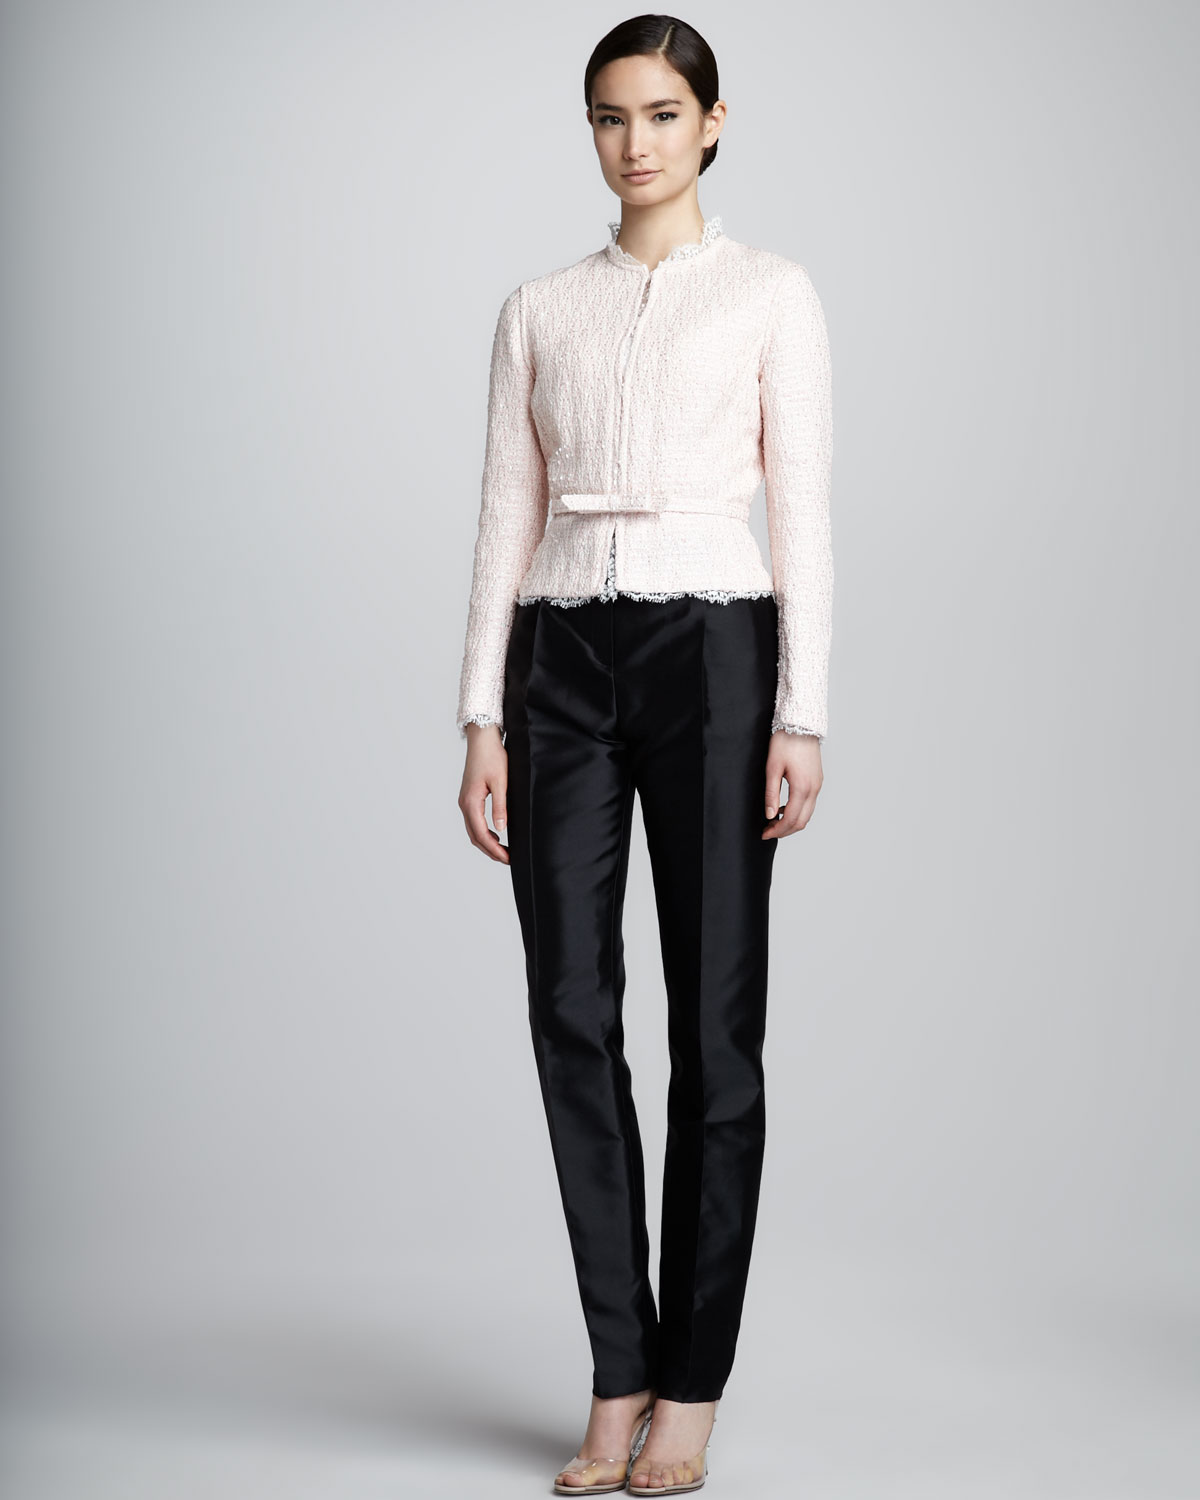 Lyst - Valentino Womens Mikado Ankle Pants in Black